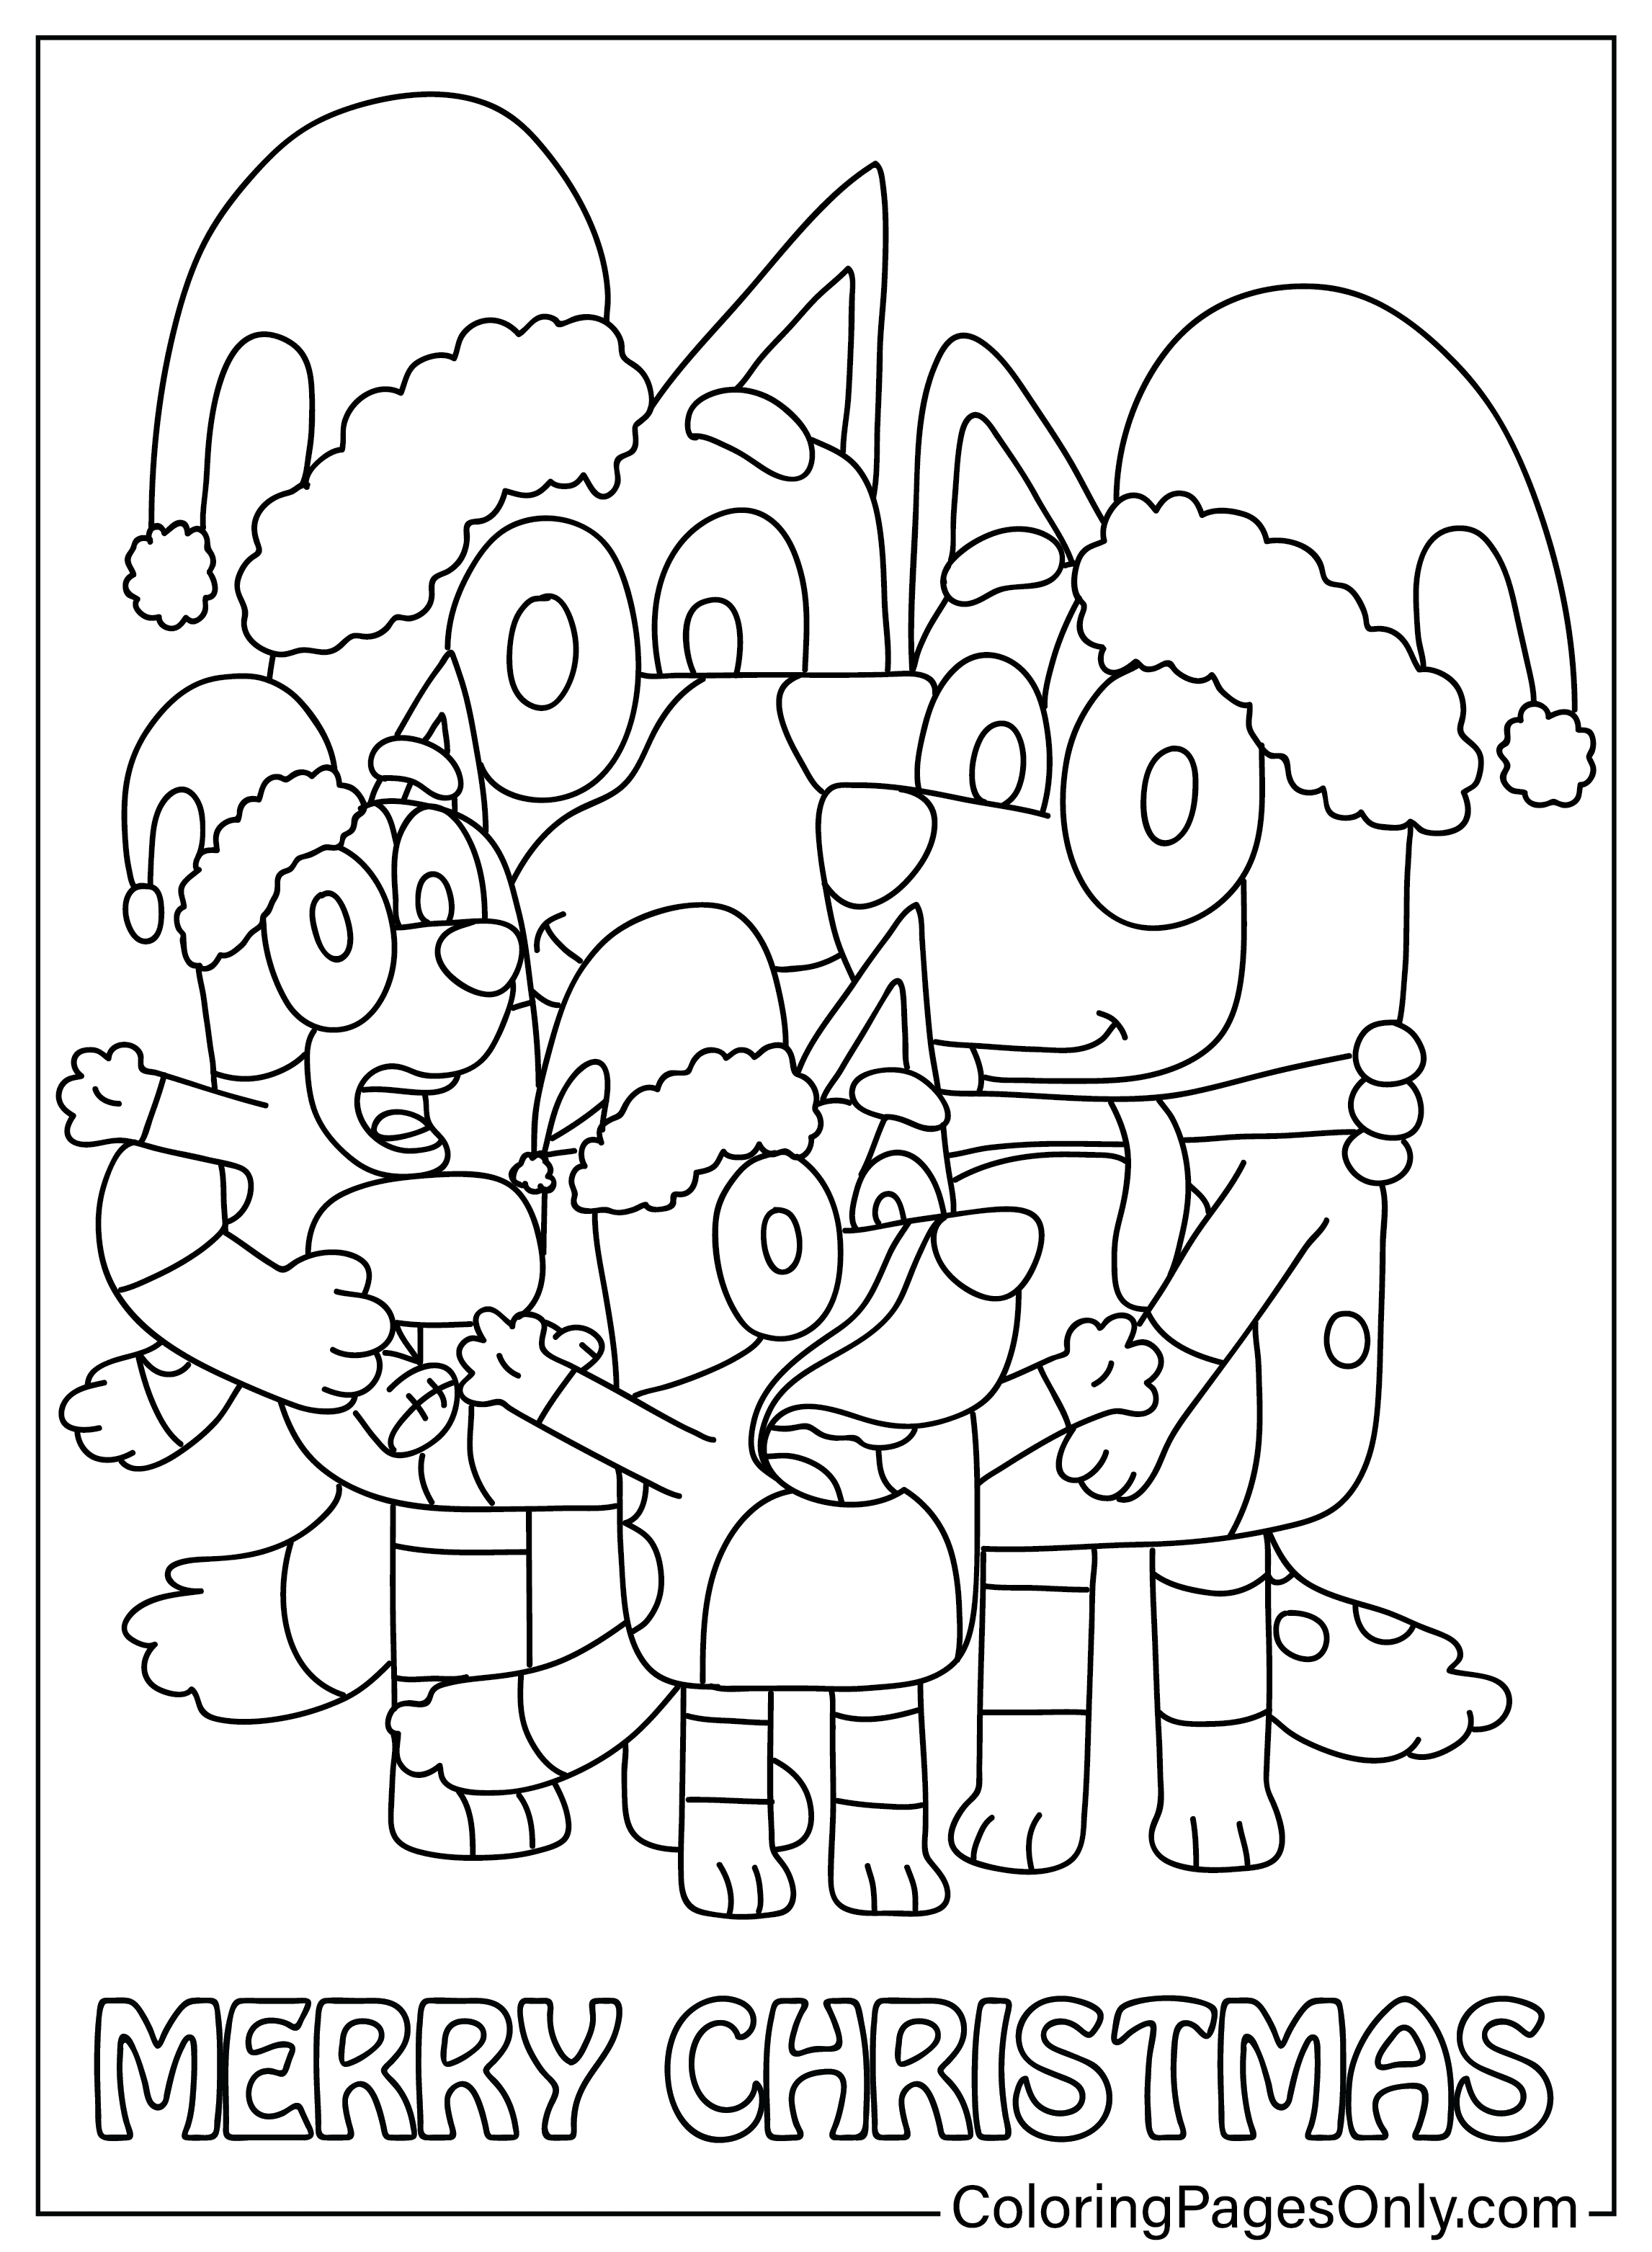 Christmas Bluey Coloring Page - Free Printable Coloring Pages